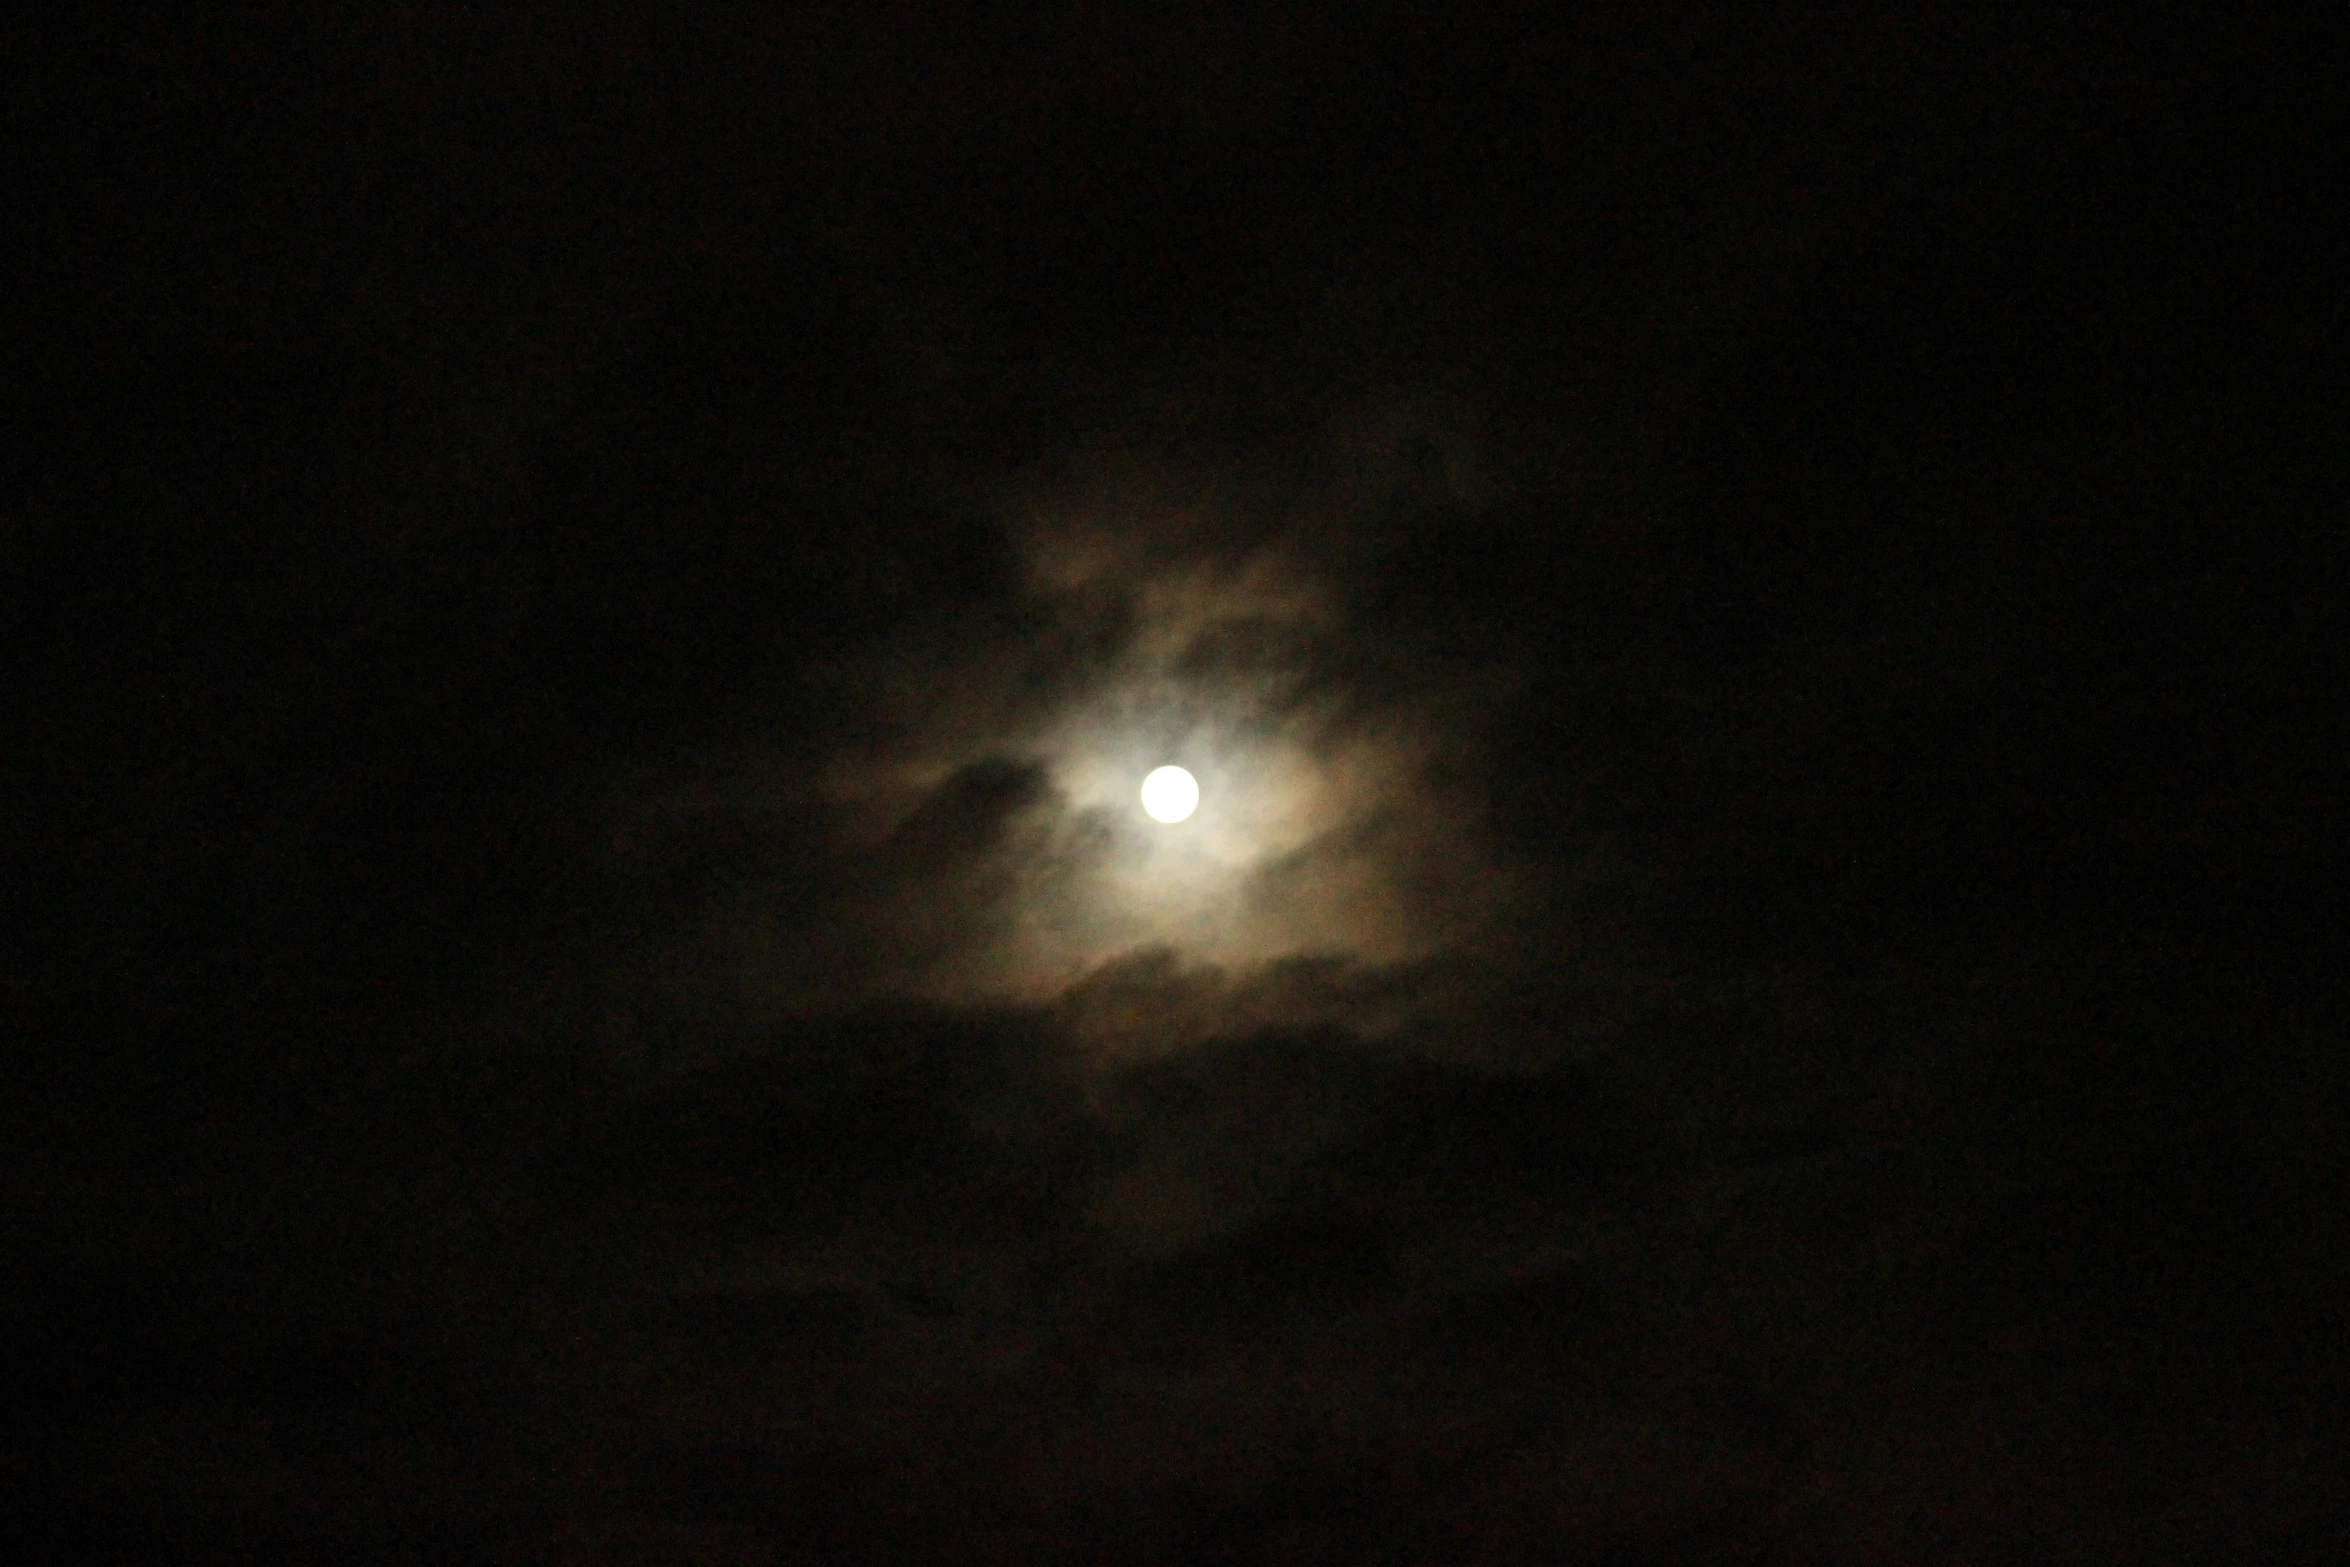 a close up view of a bright white moon in the dark sky